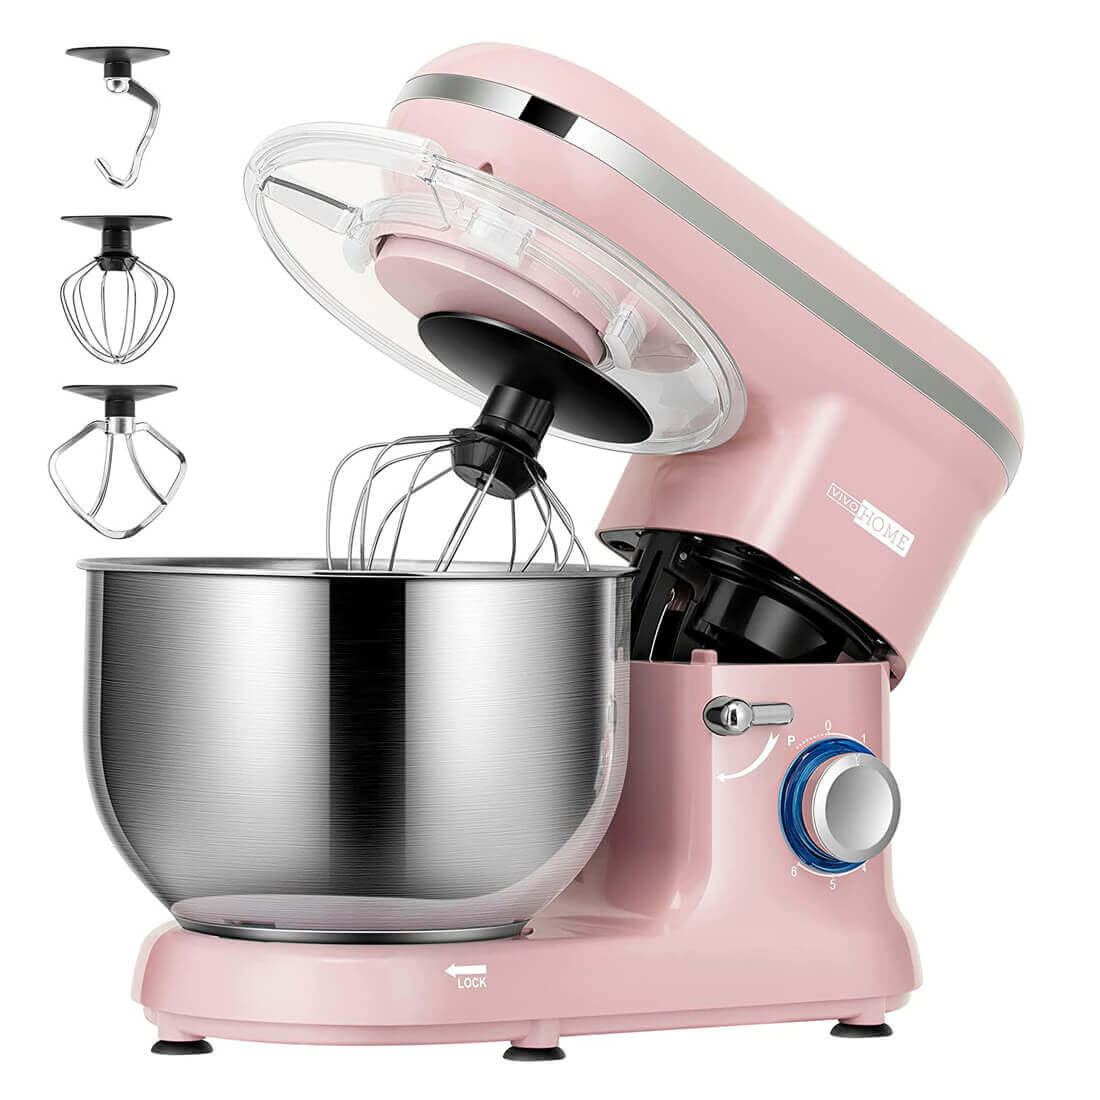 VIVOHOME 7.5 qt. 6-Speed Silver Tilt-Head Electric Stand Mixer with Accessories and ETL Listed